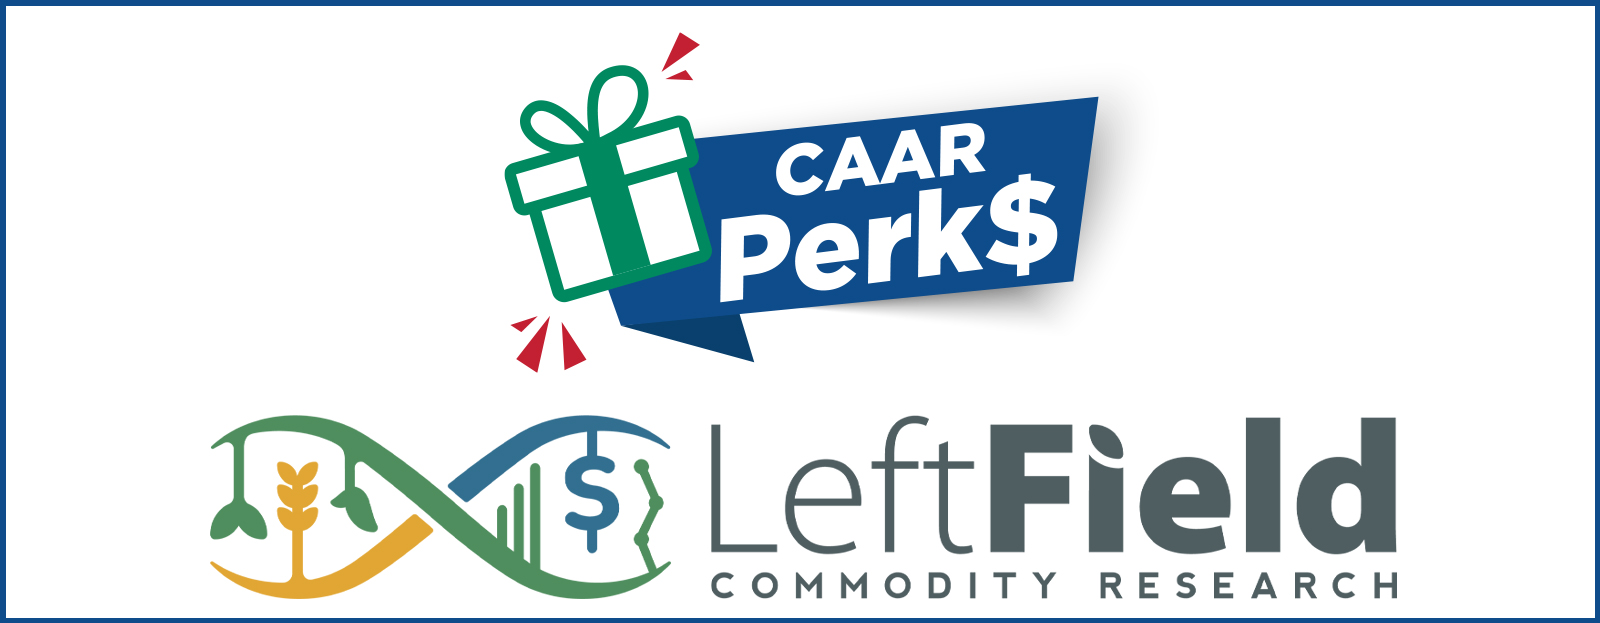 CAAR Perk$ Profile for LeftField Commodity Research